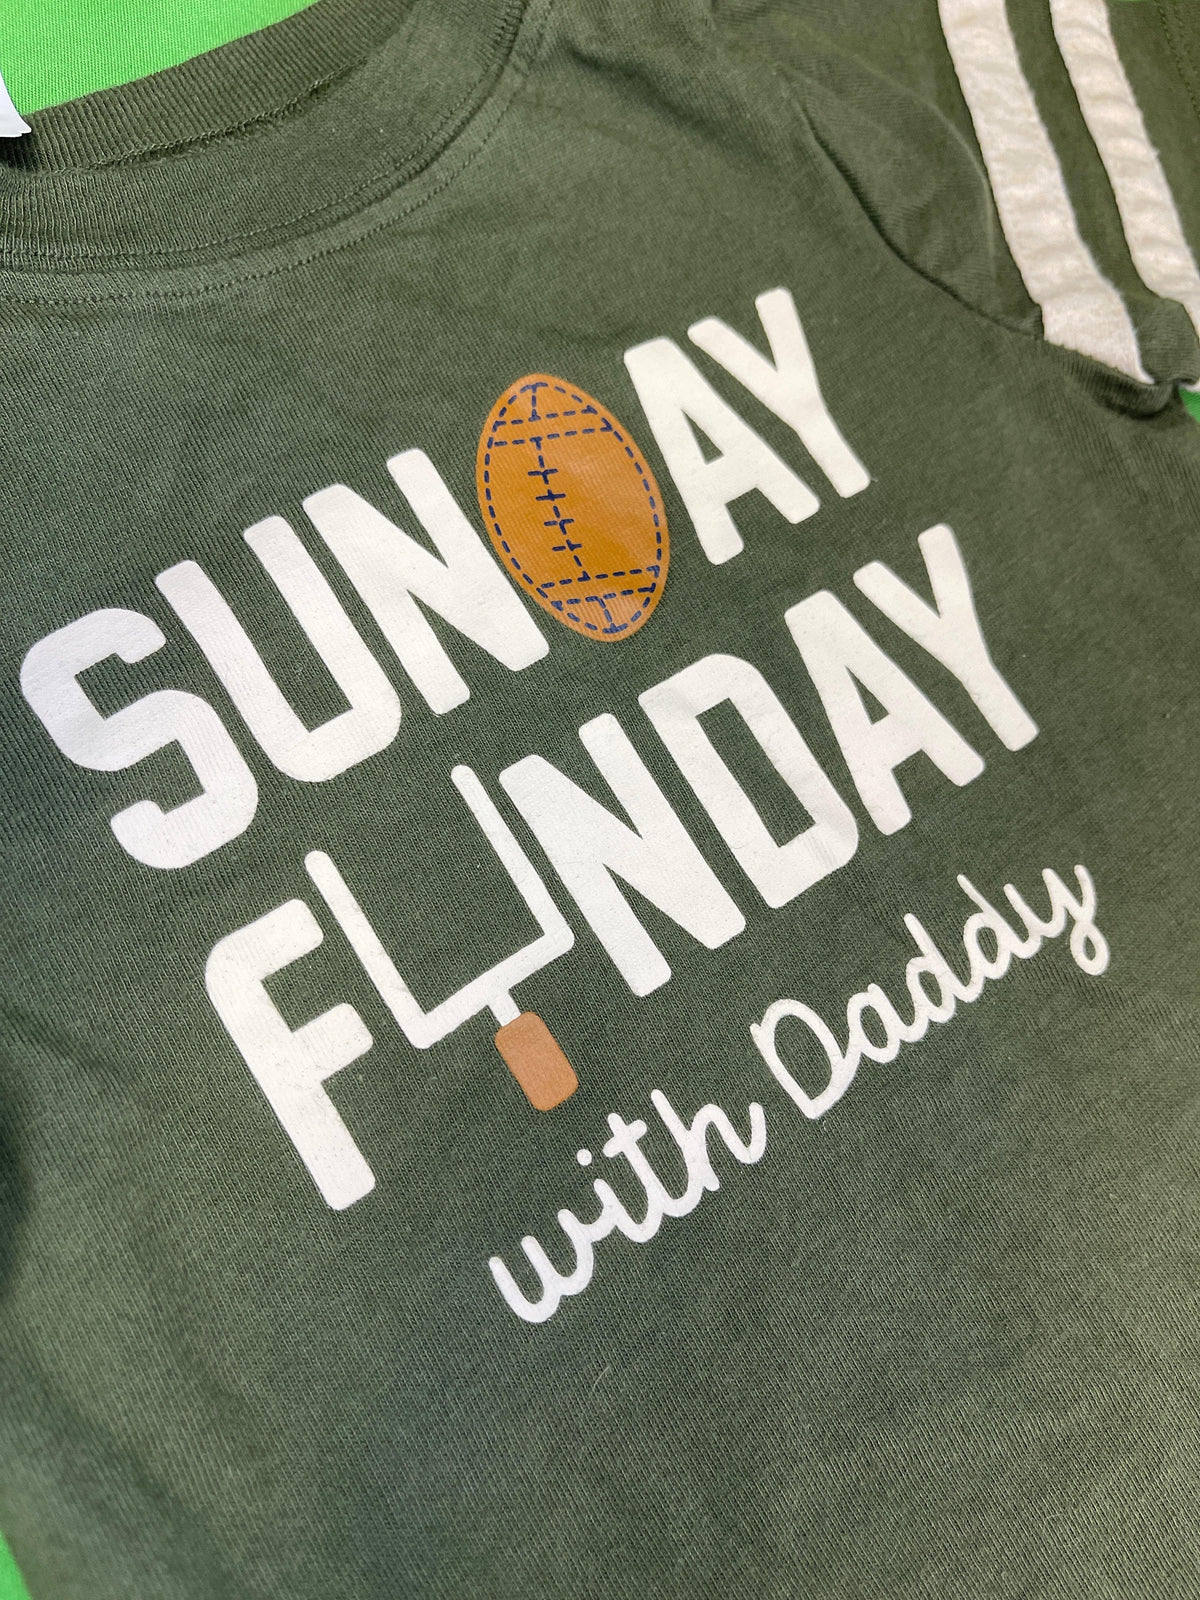 American Football "Sunday Funday with Daddy" Bodysuit/Vest 12 Months